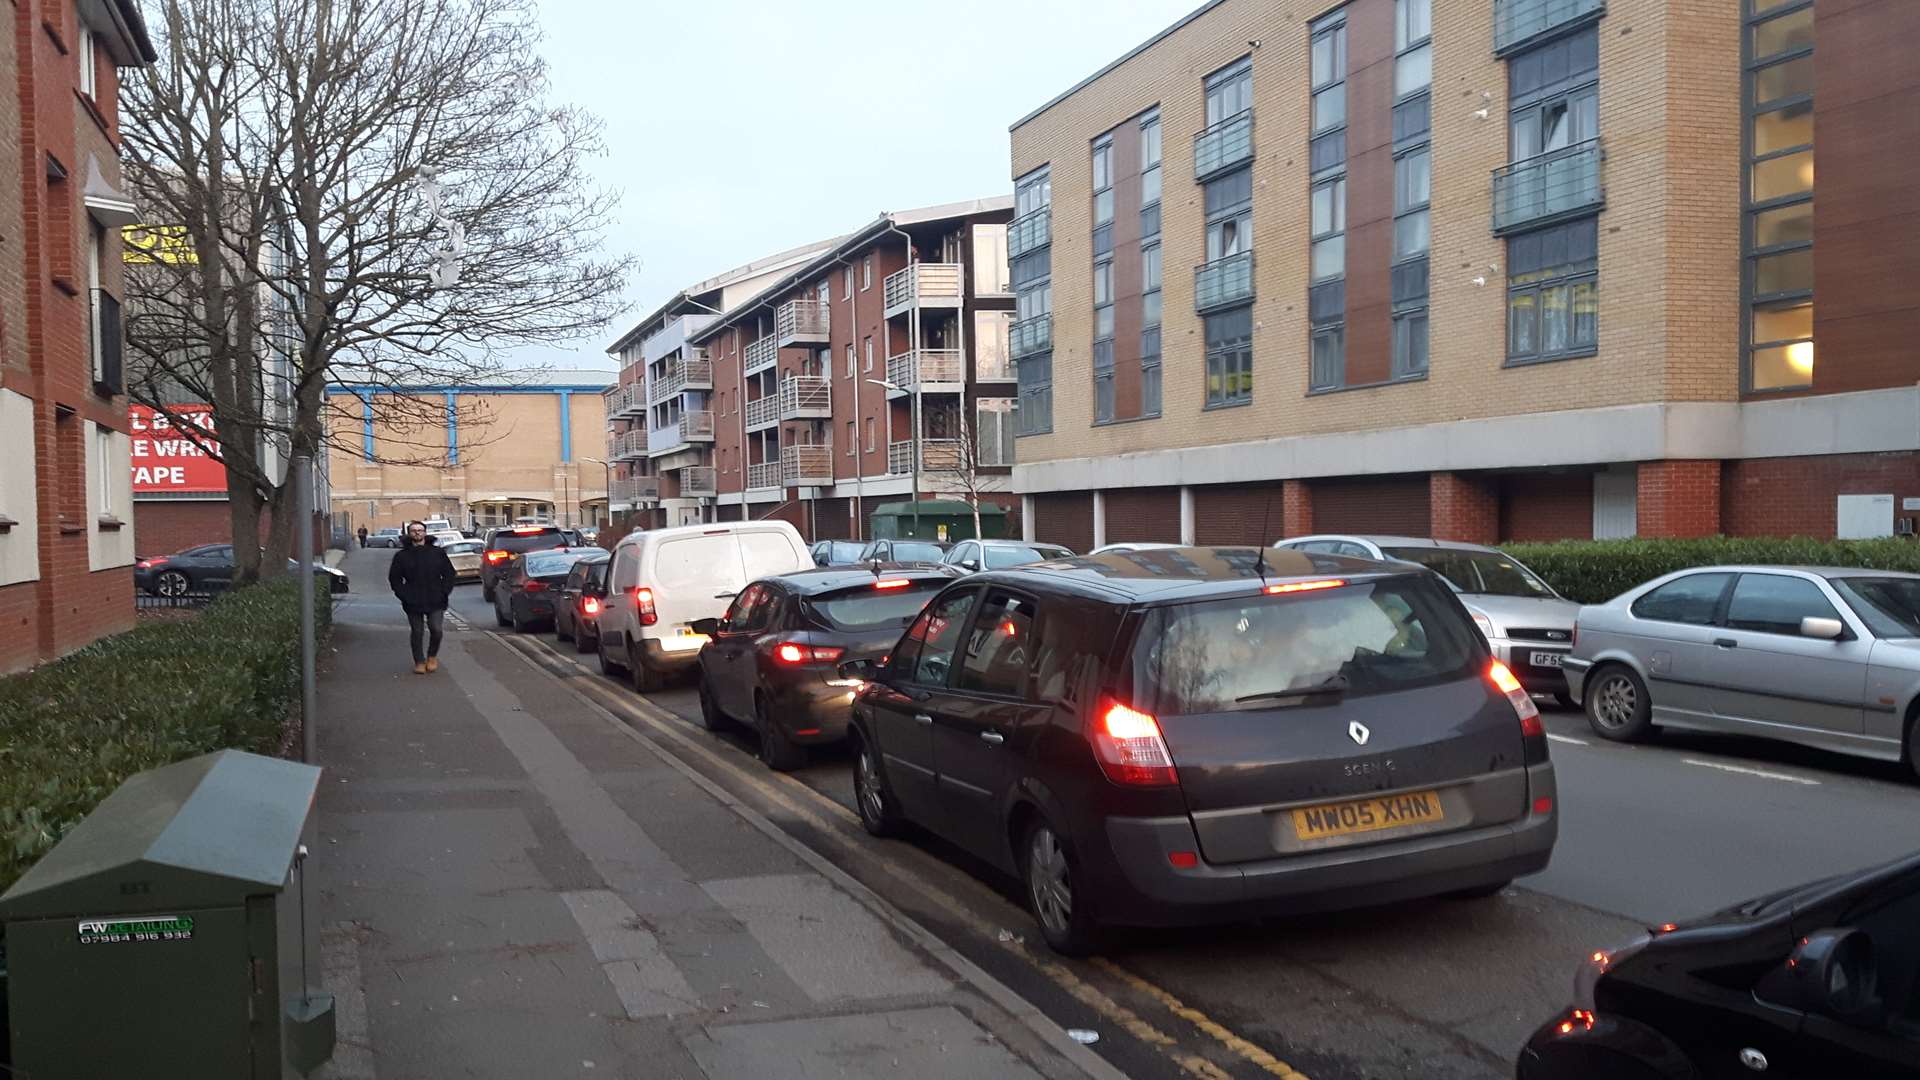 Traffic is backed up in several places in Maidstone after roadworks in Tonbridge Road. This is cars in Hart Street.